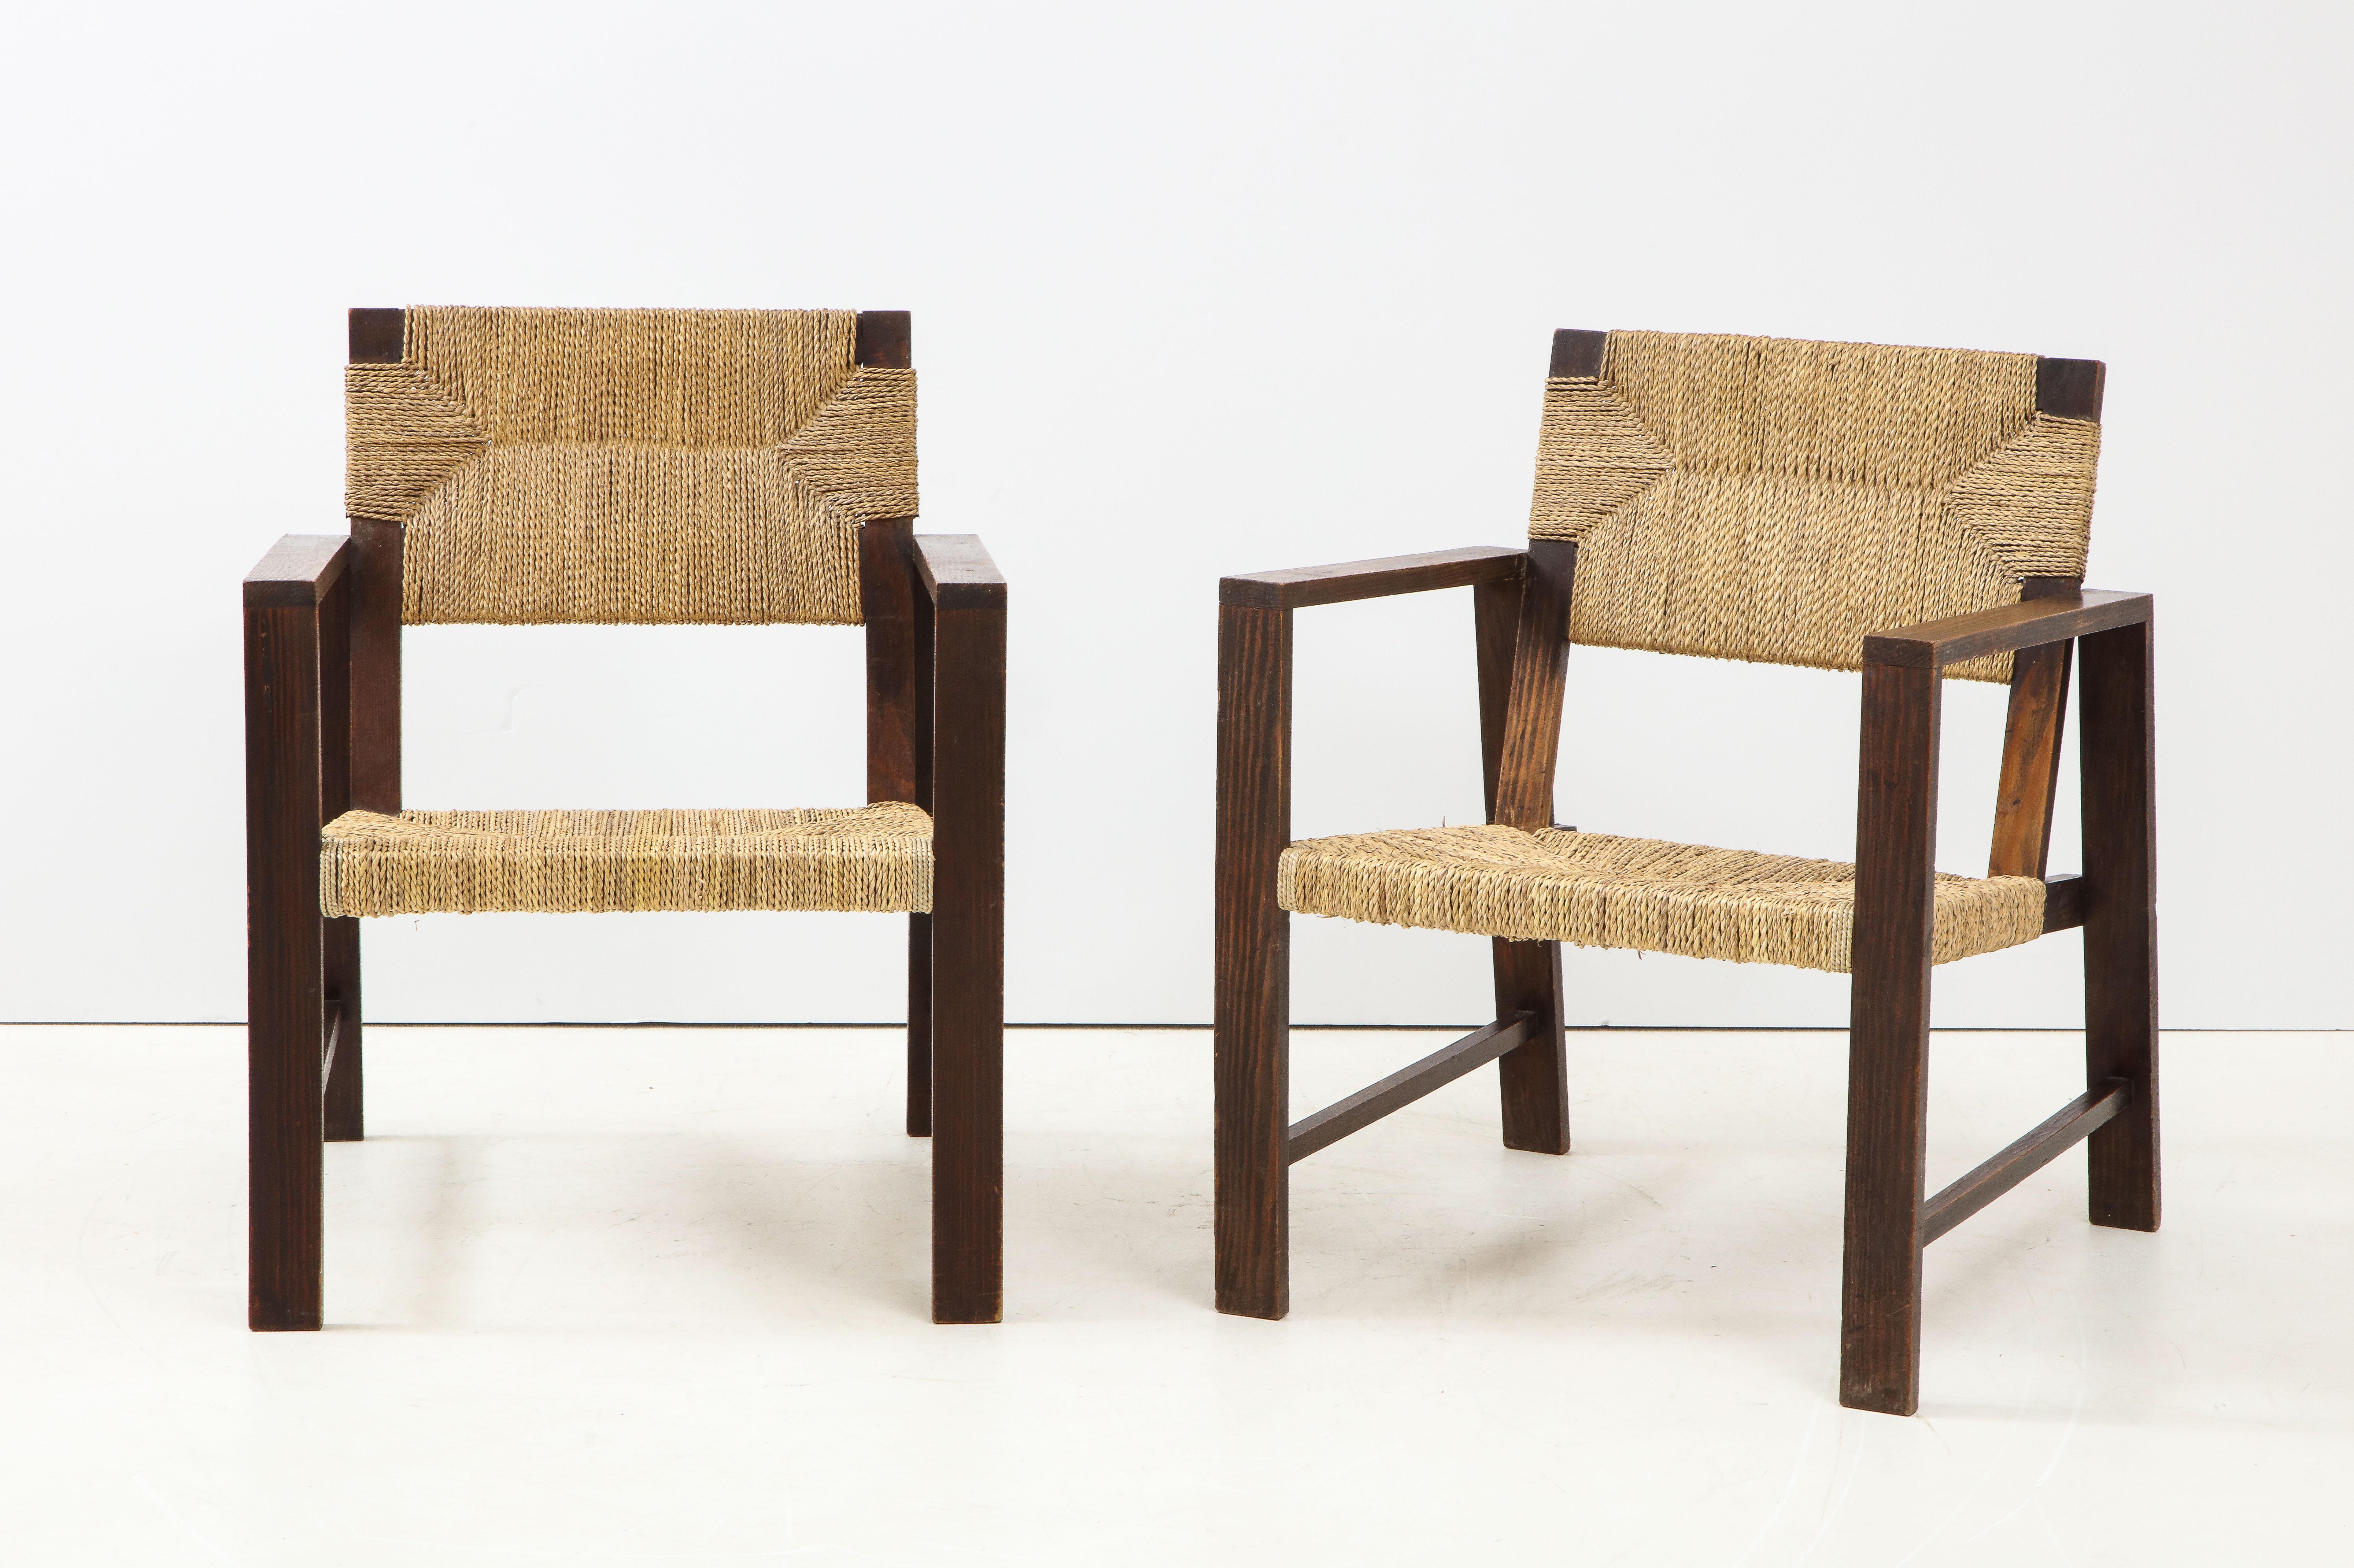 Pair of Art Deco rope armchairs, France, circa 1925.